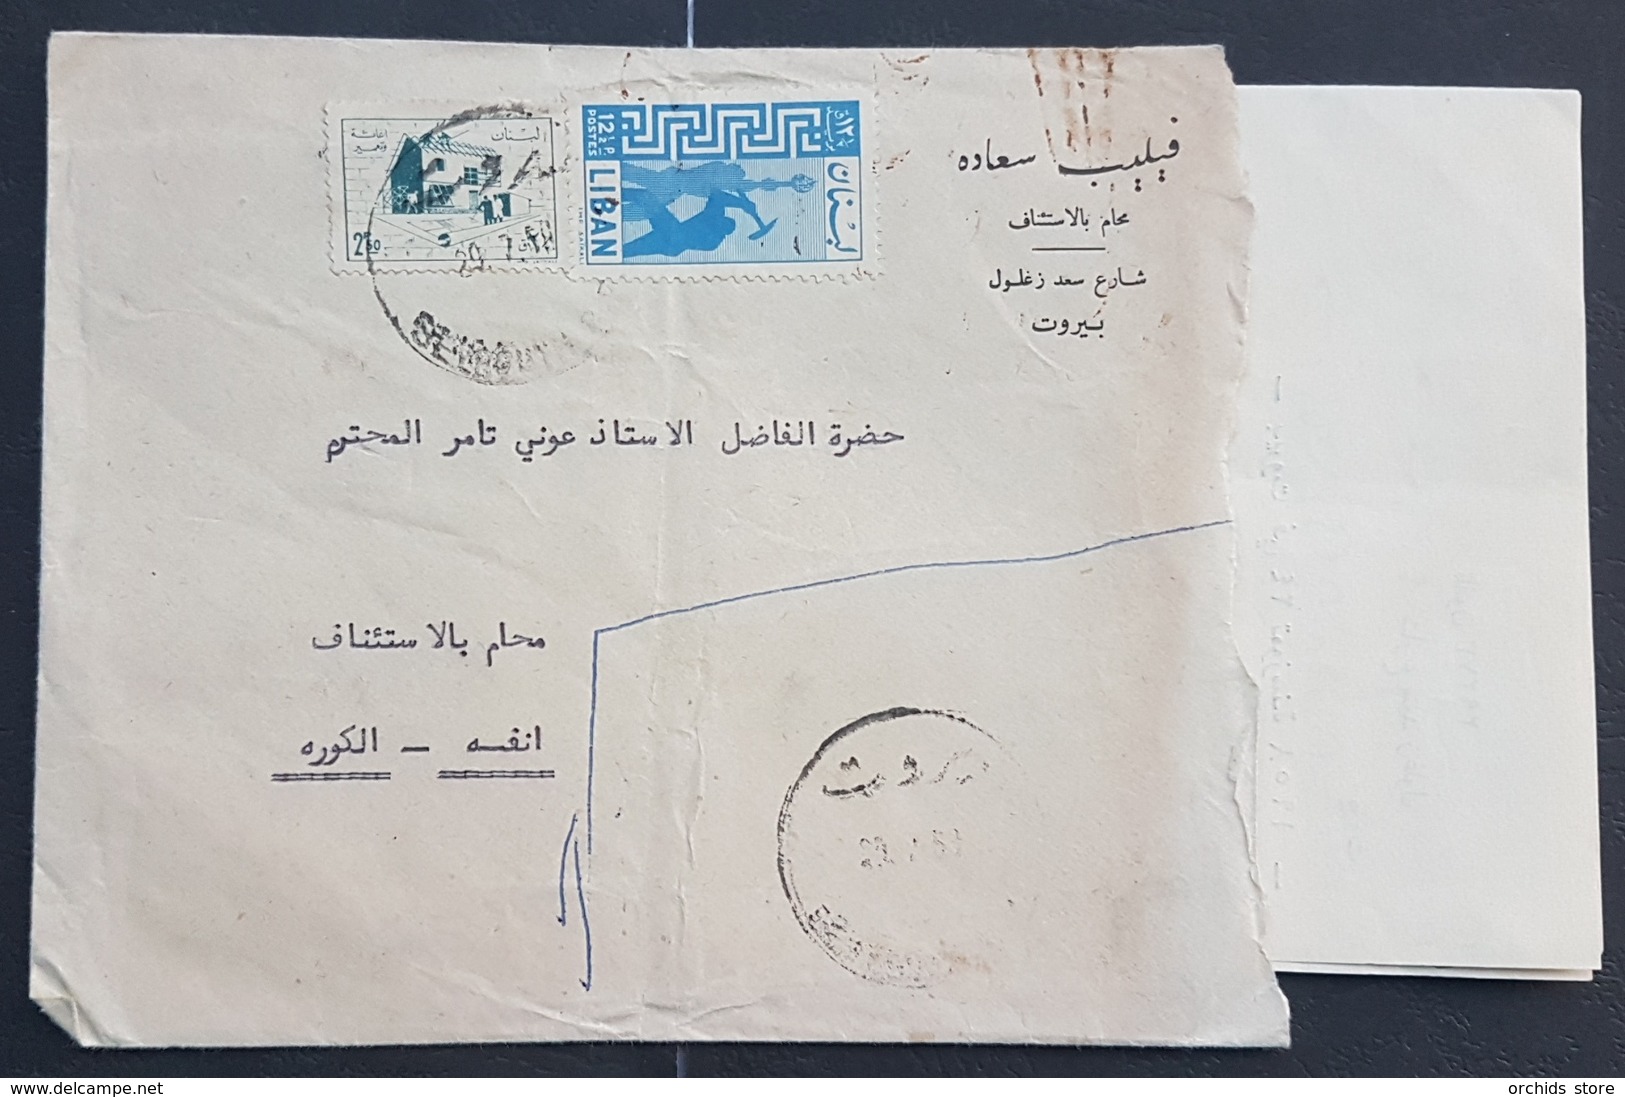 GE - Lebanon 1958 Nice Cover From Philippe Saade Franked BlueWork Stamp 12p50 And Earthquake Tax 2p.50 Sent To ENFE - Libanon